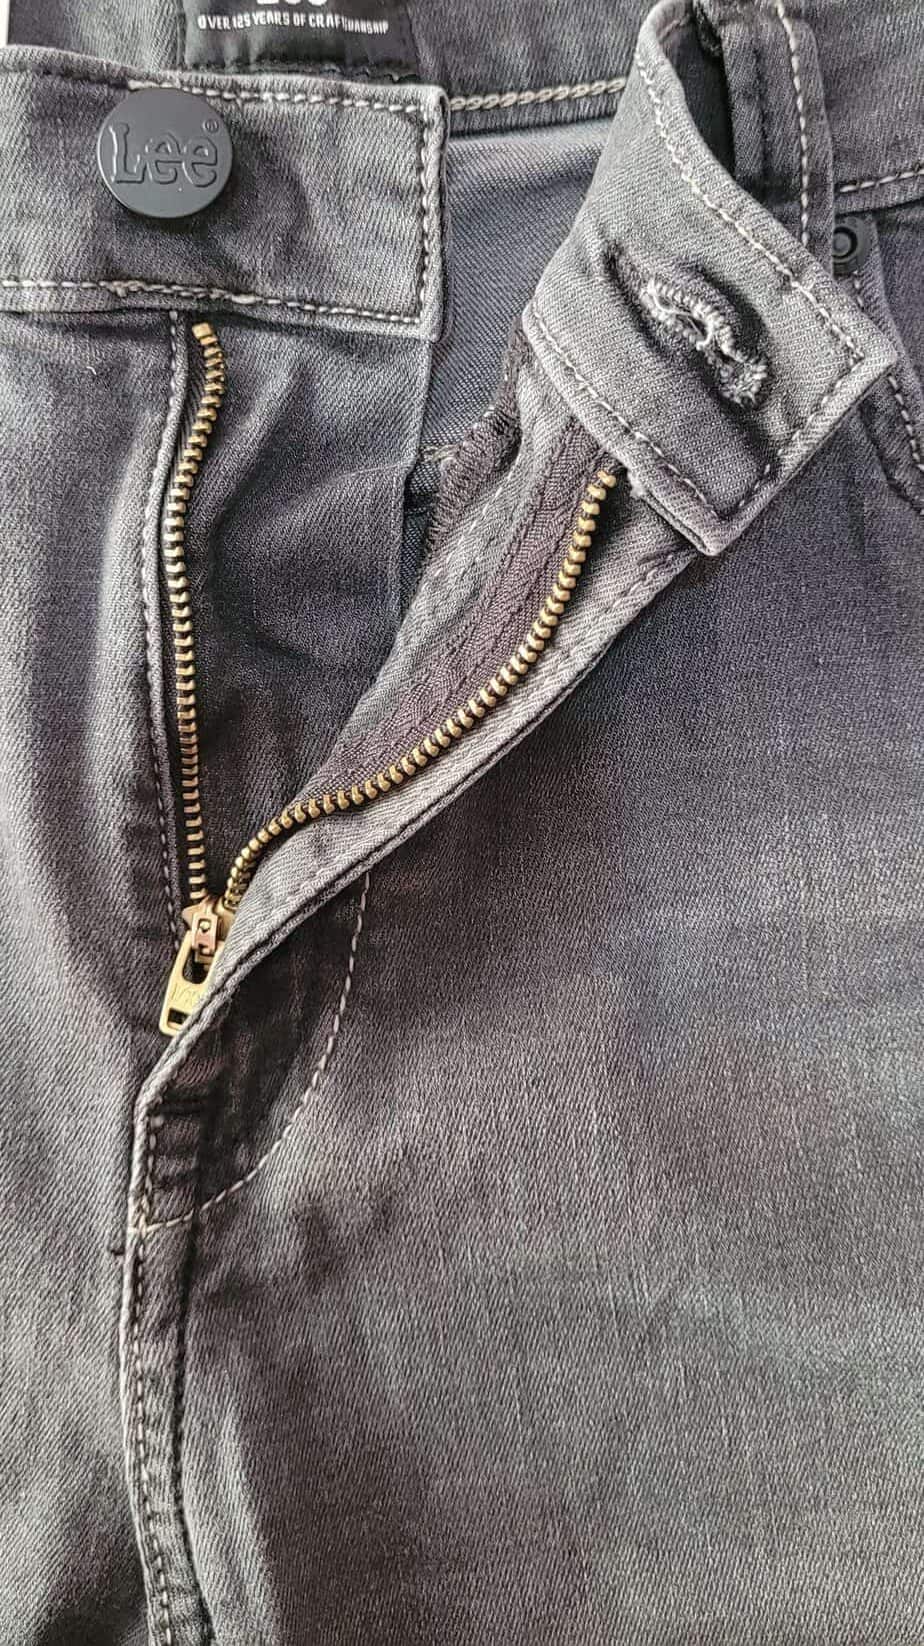 Lee jeans button and zipper photo